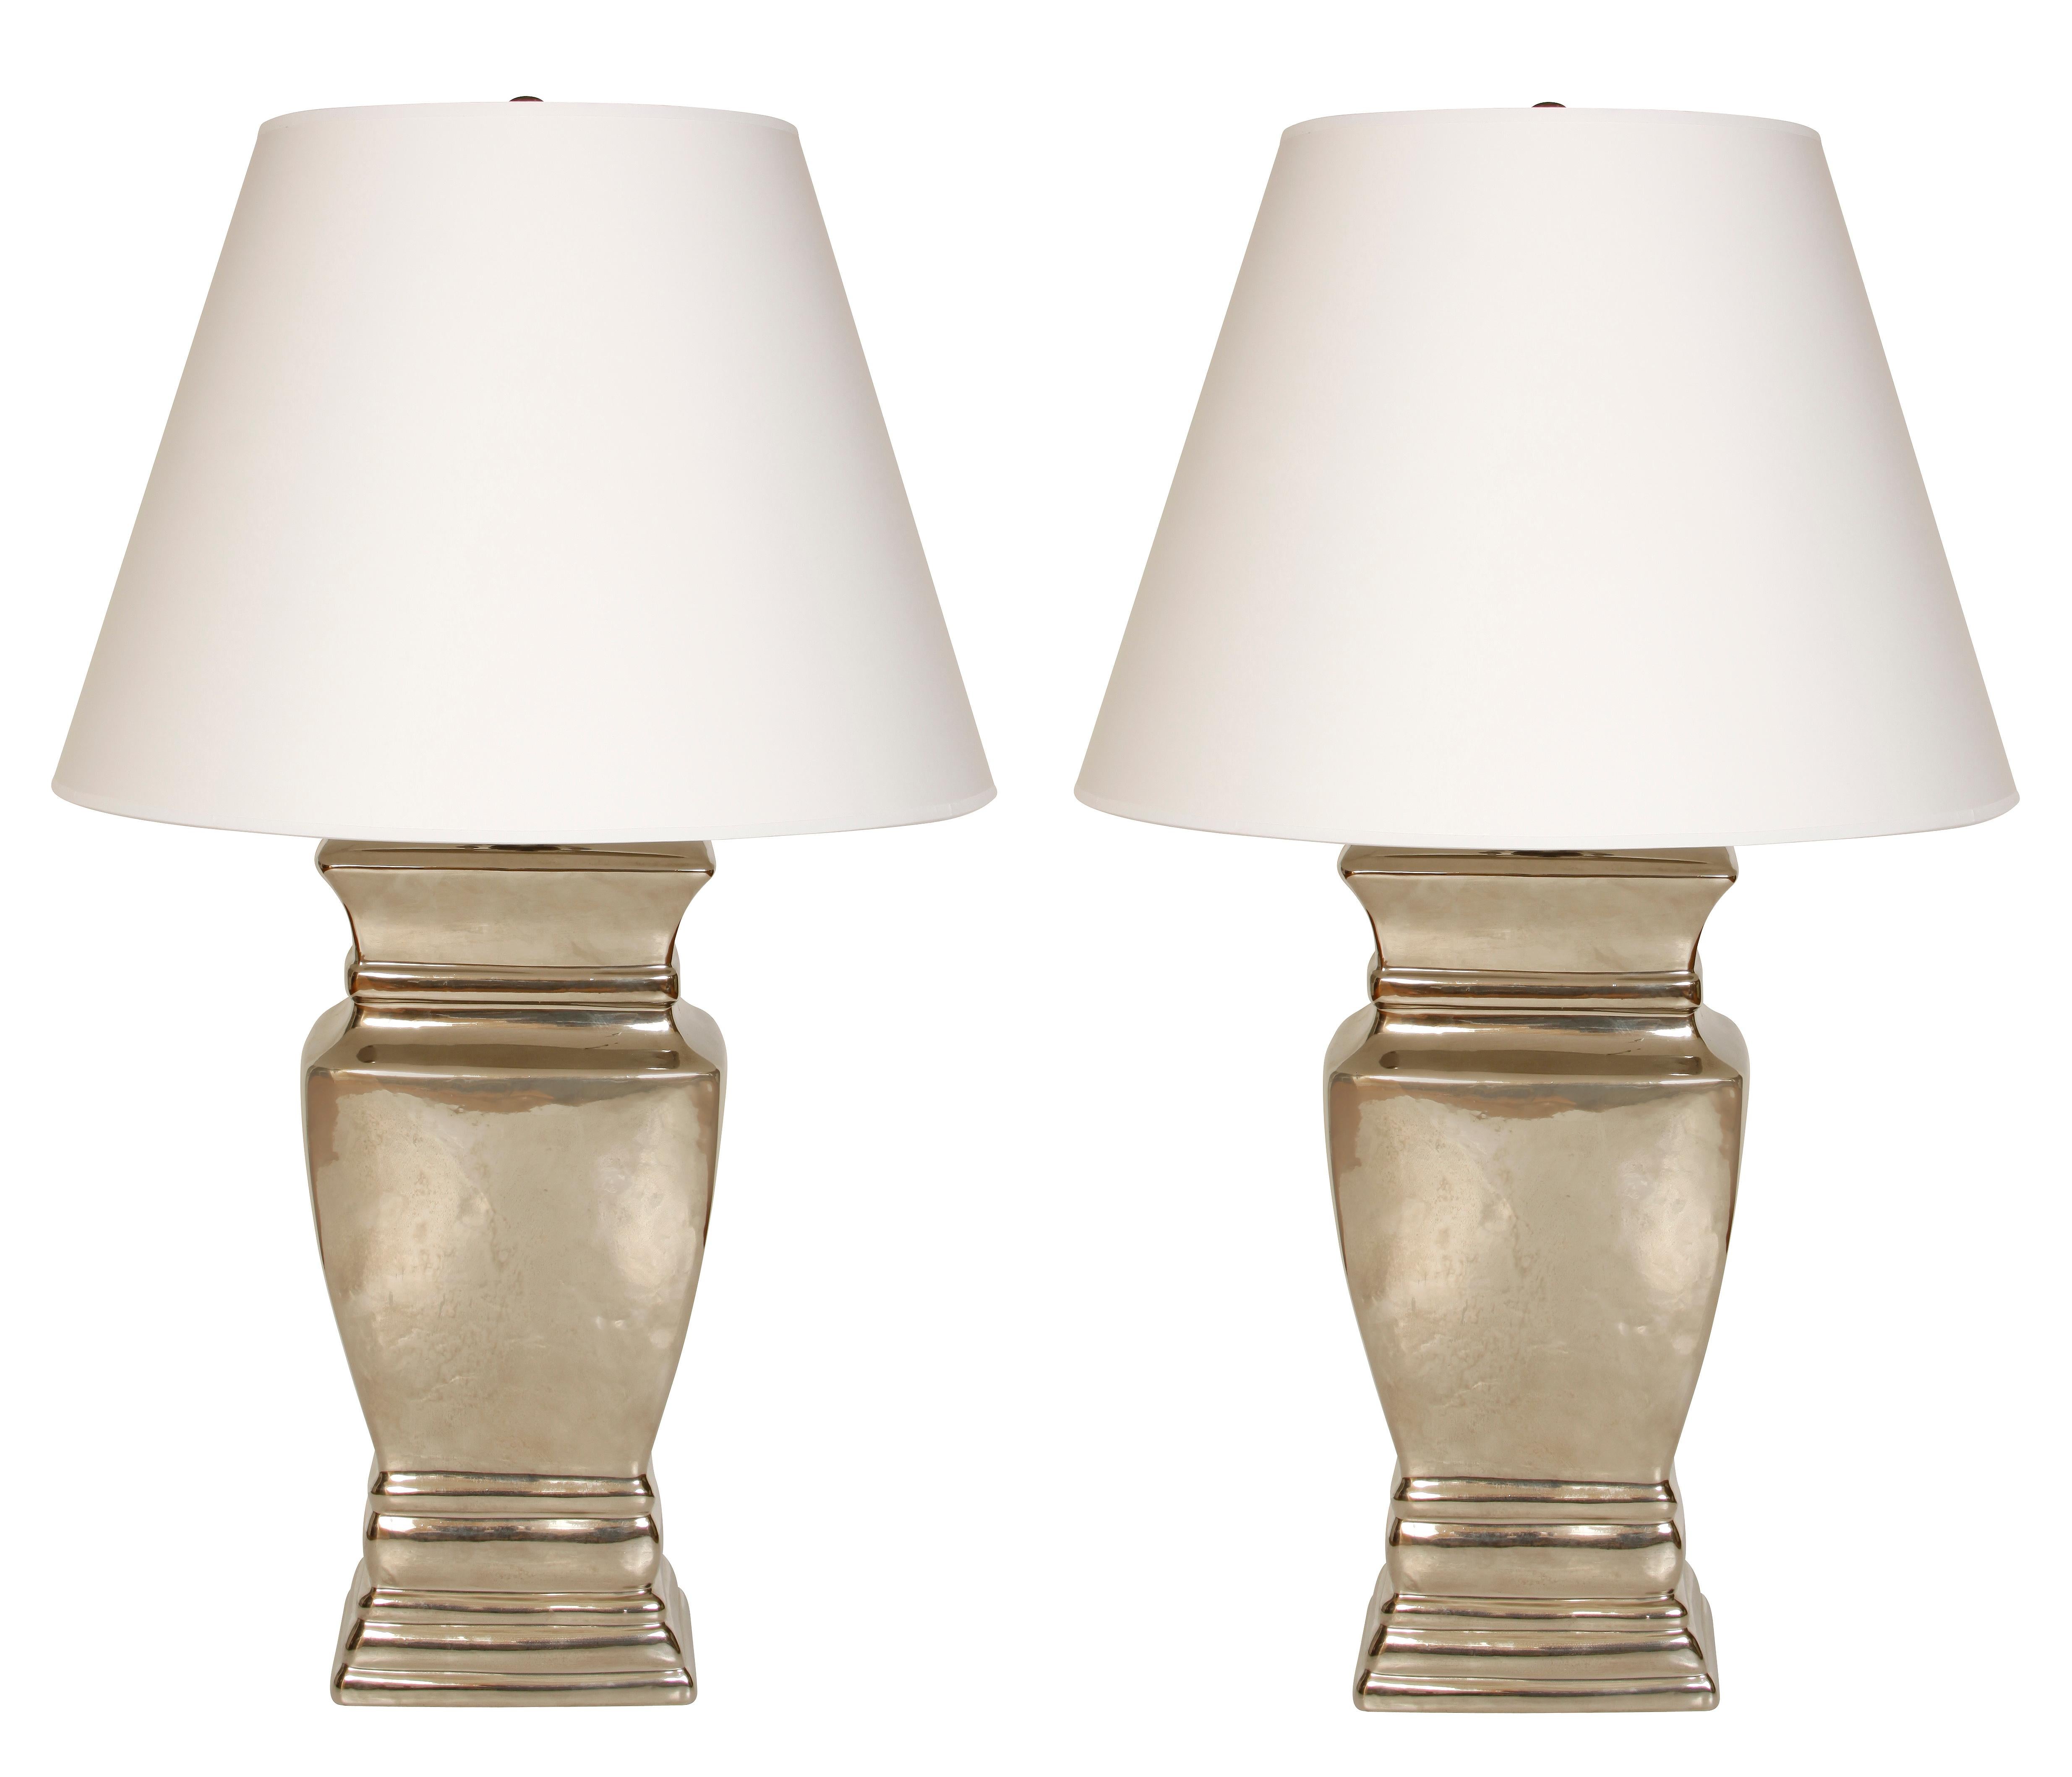 A pair of modern silvered ceramic lamps.